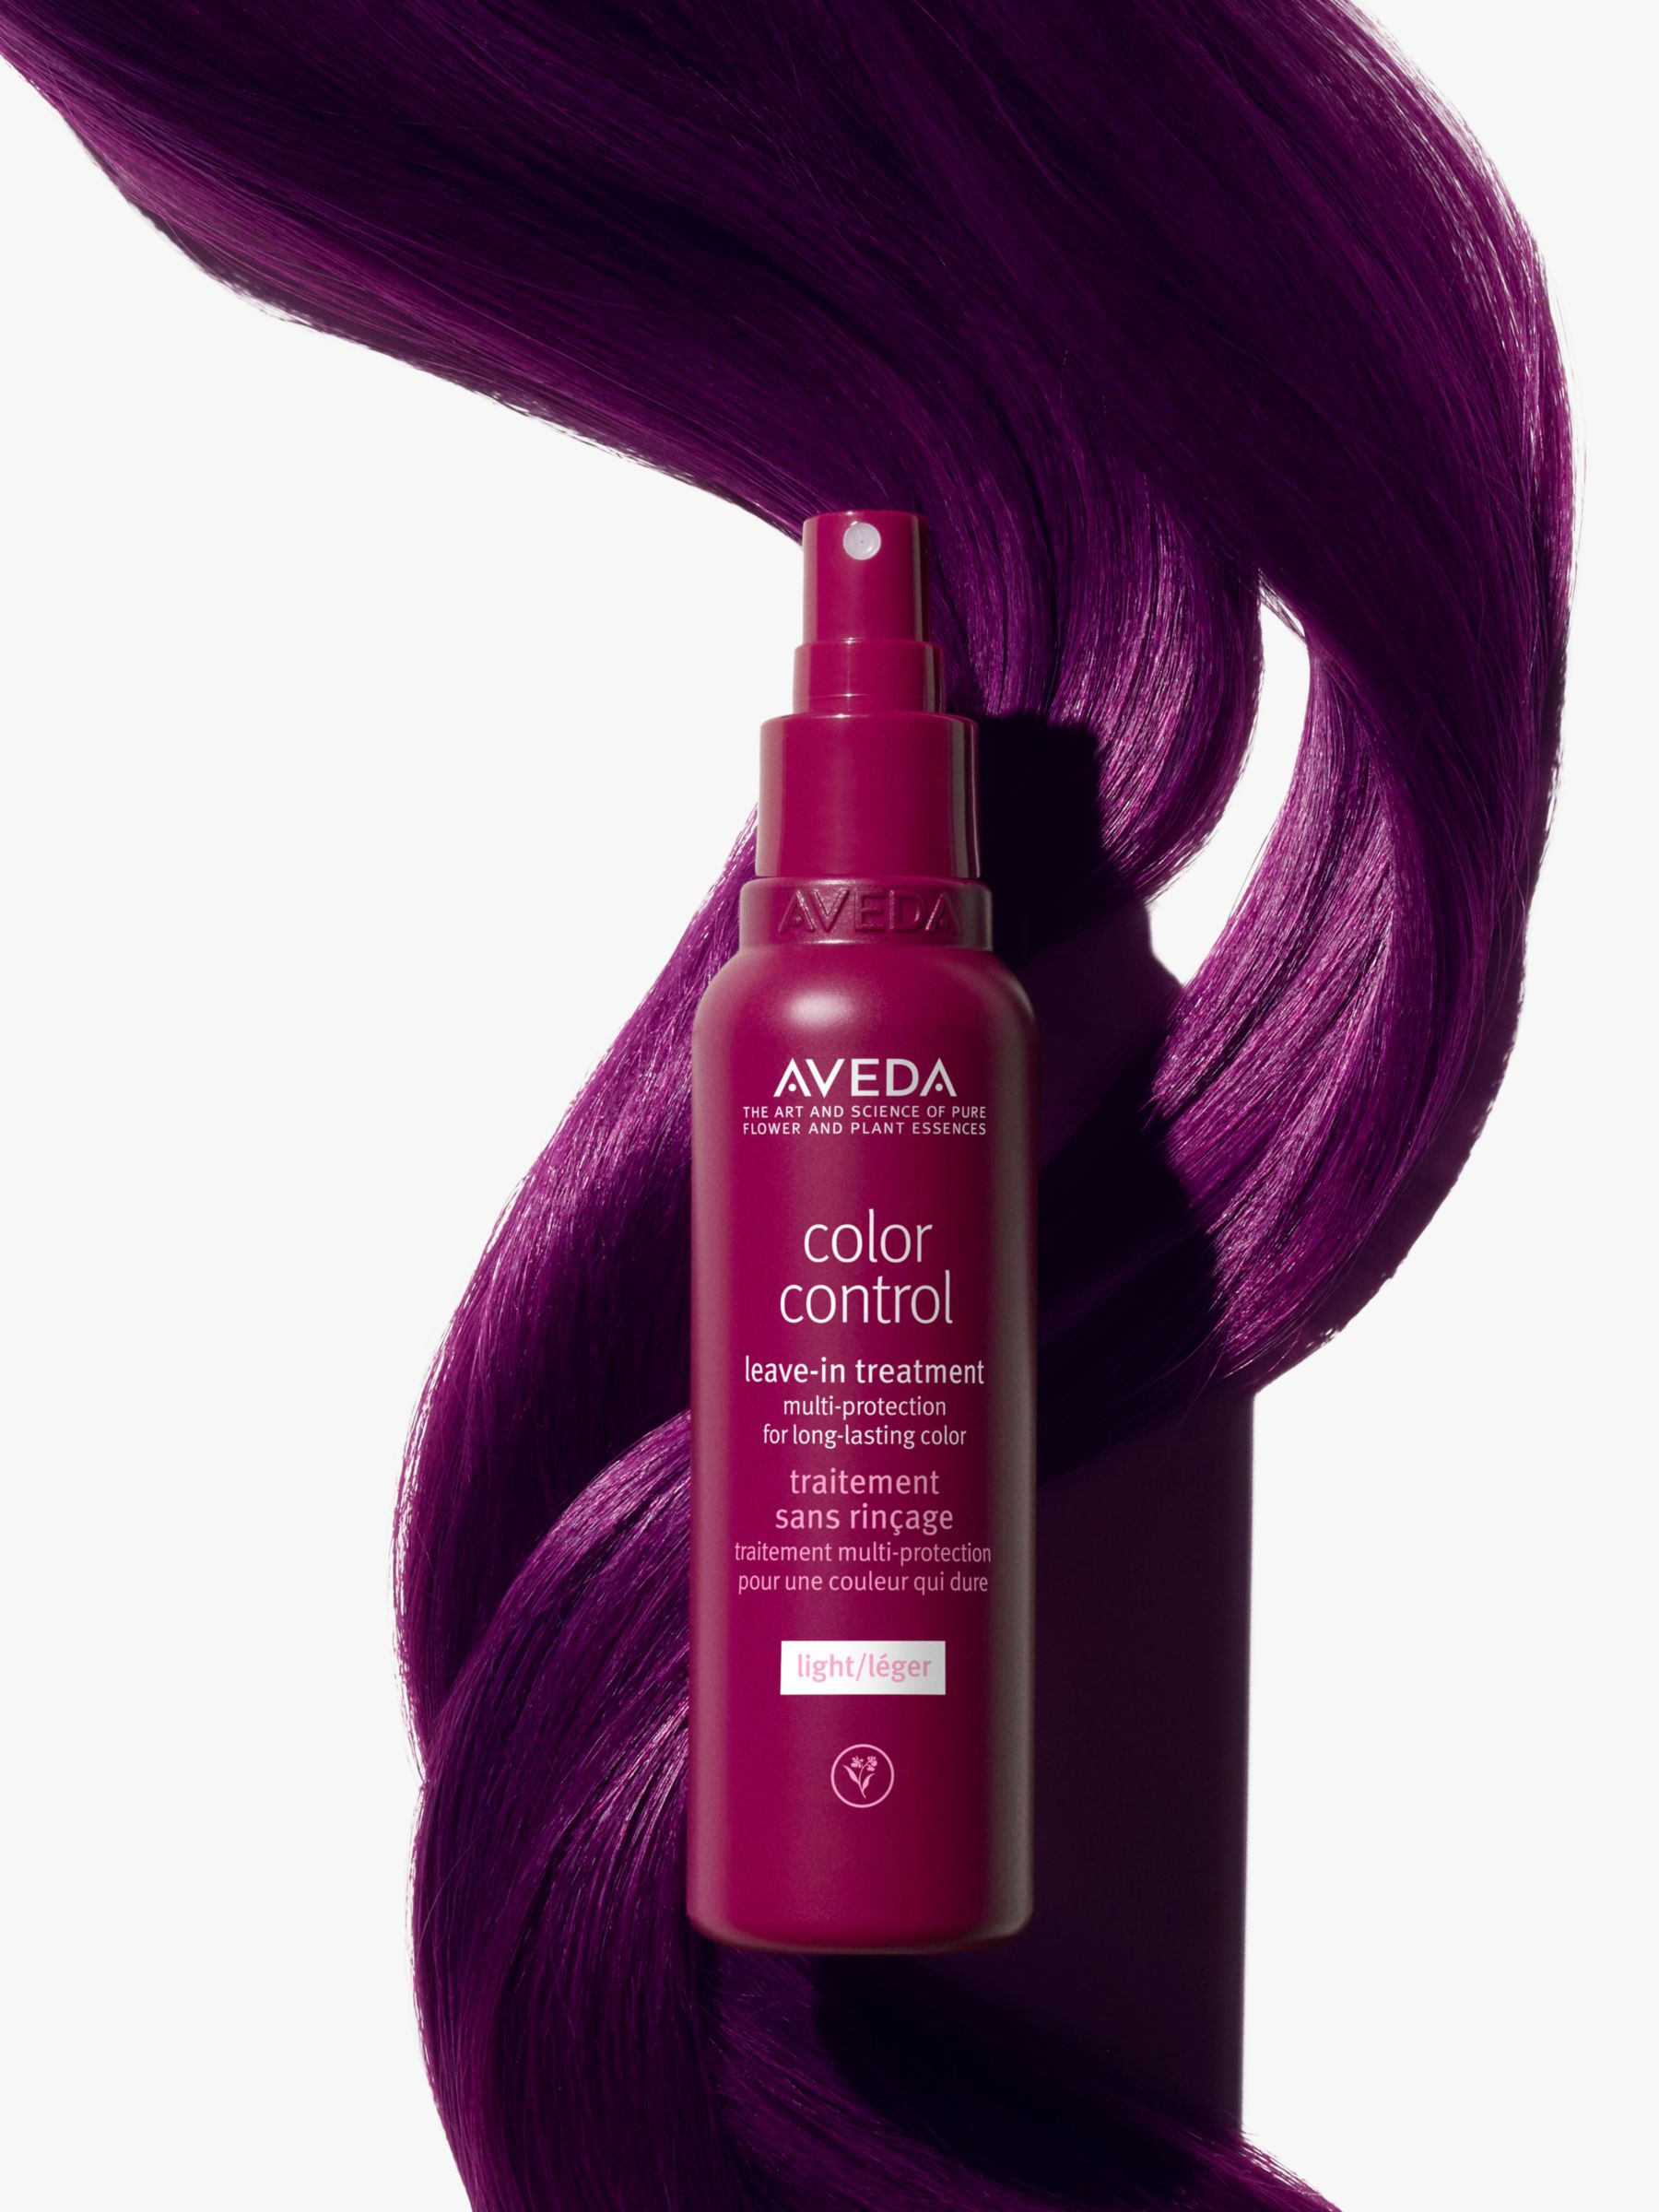 Aveda Colour Control Leave-In Treatment, Light, 150ml